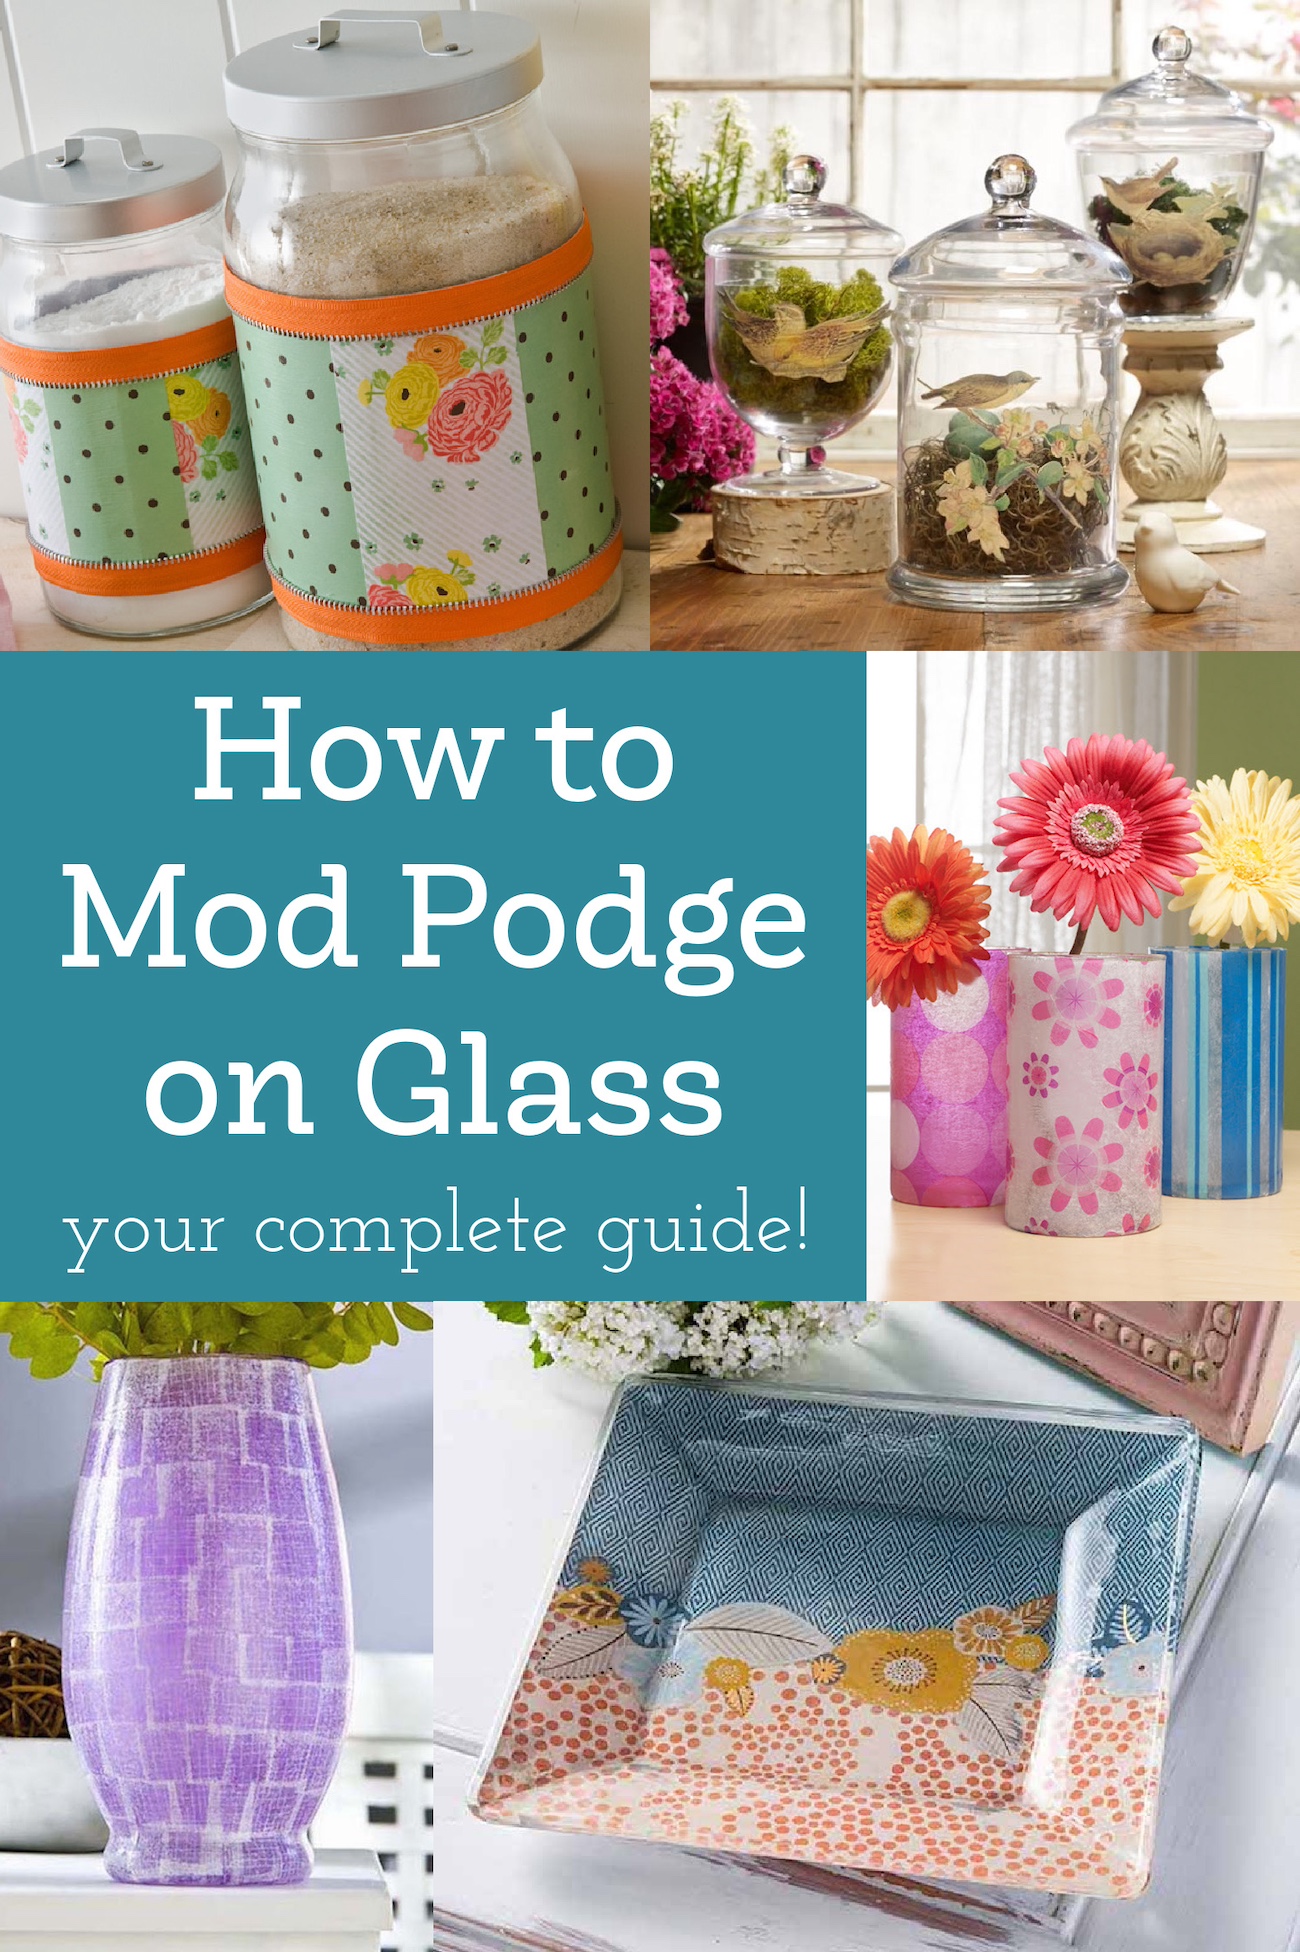 How to Mod Podge on Glass a guide